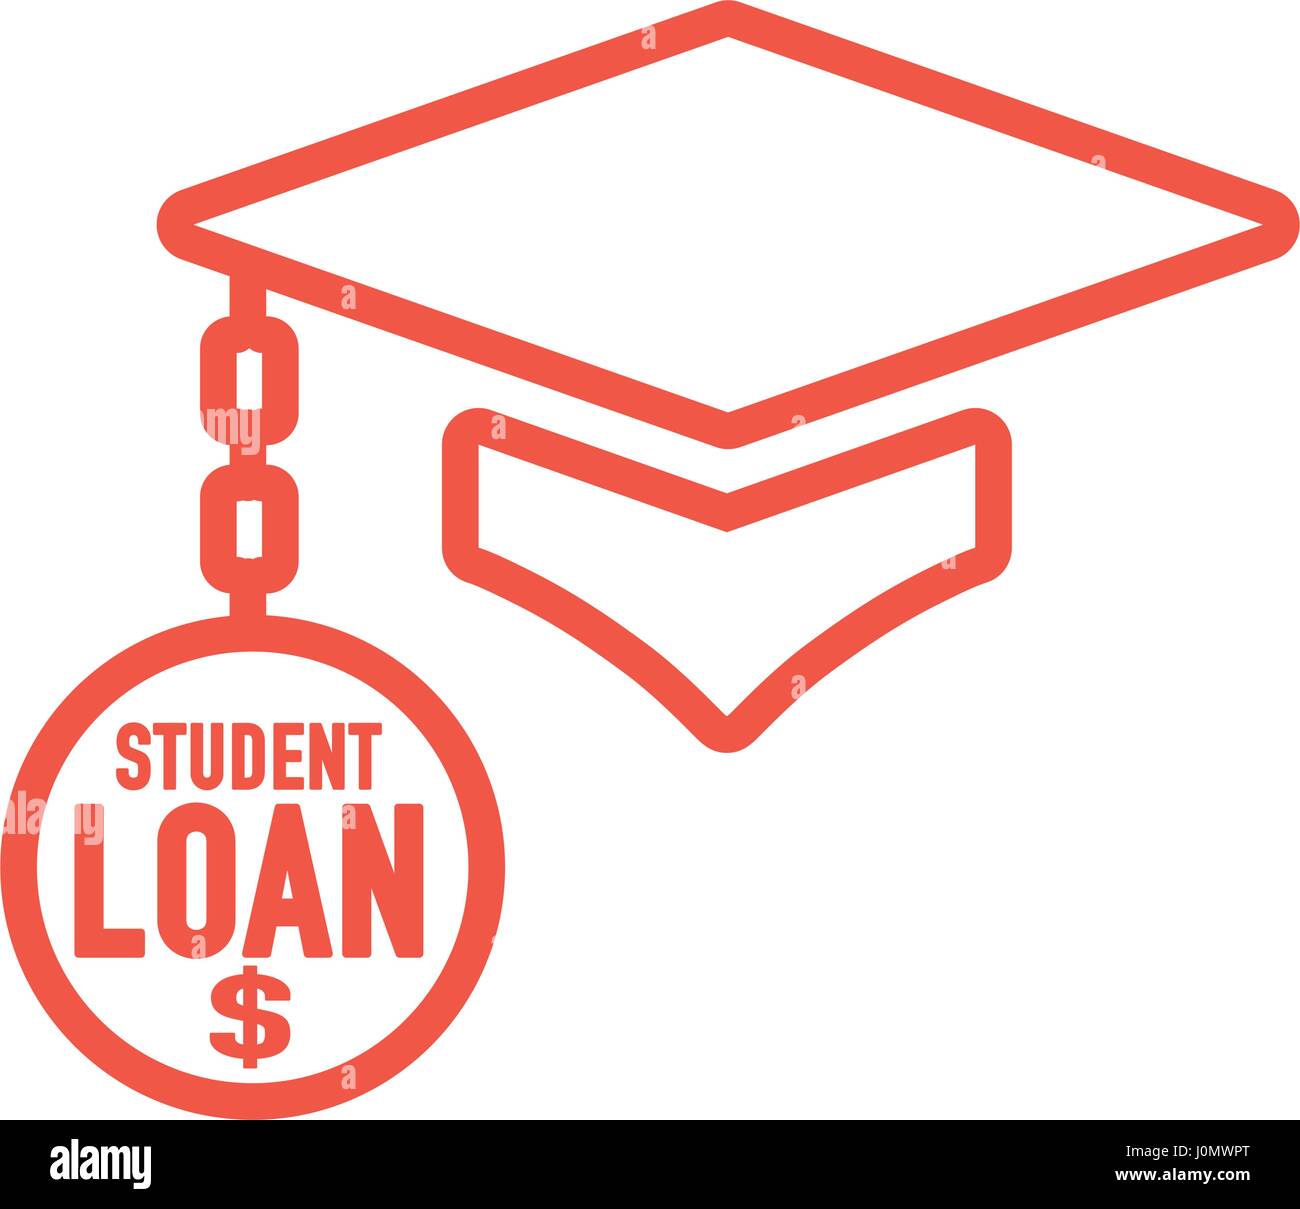 Graduate Student Loan Icon - Student Loan Graphics for Education Financial Aid or Assistance, Government Loans, & Debt Stock Vector